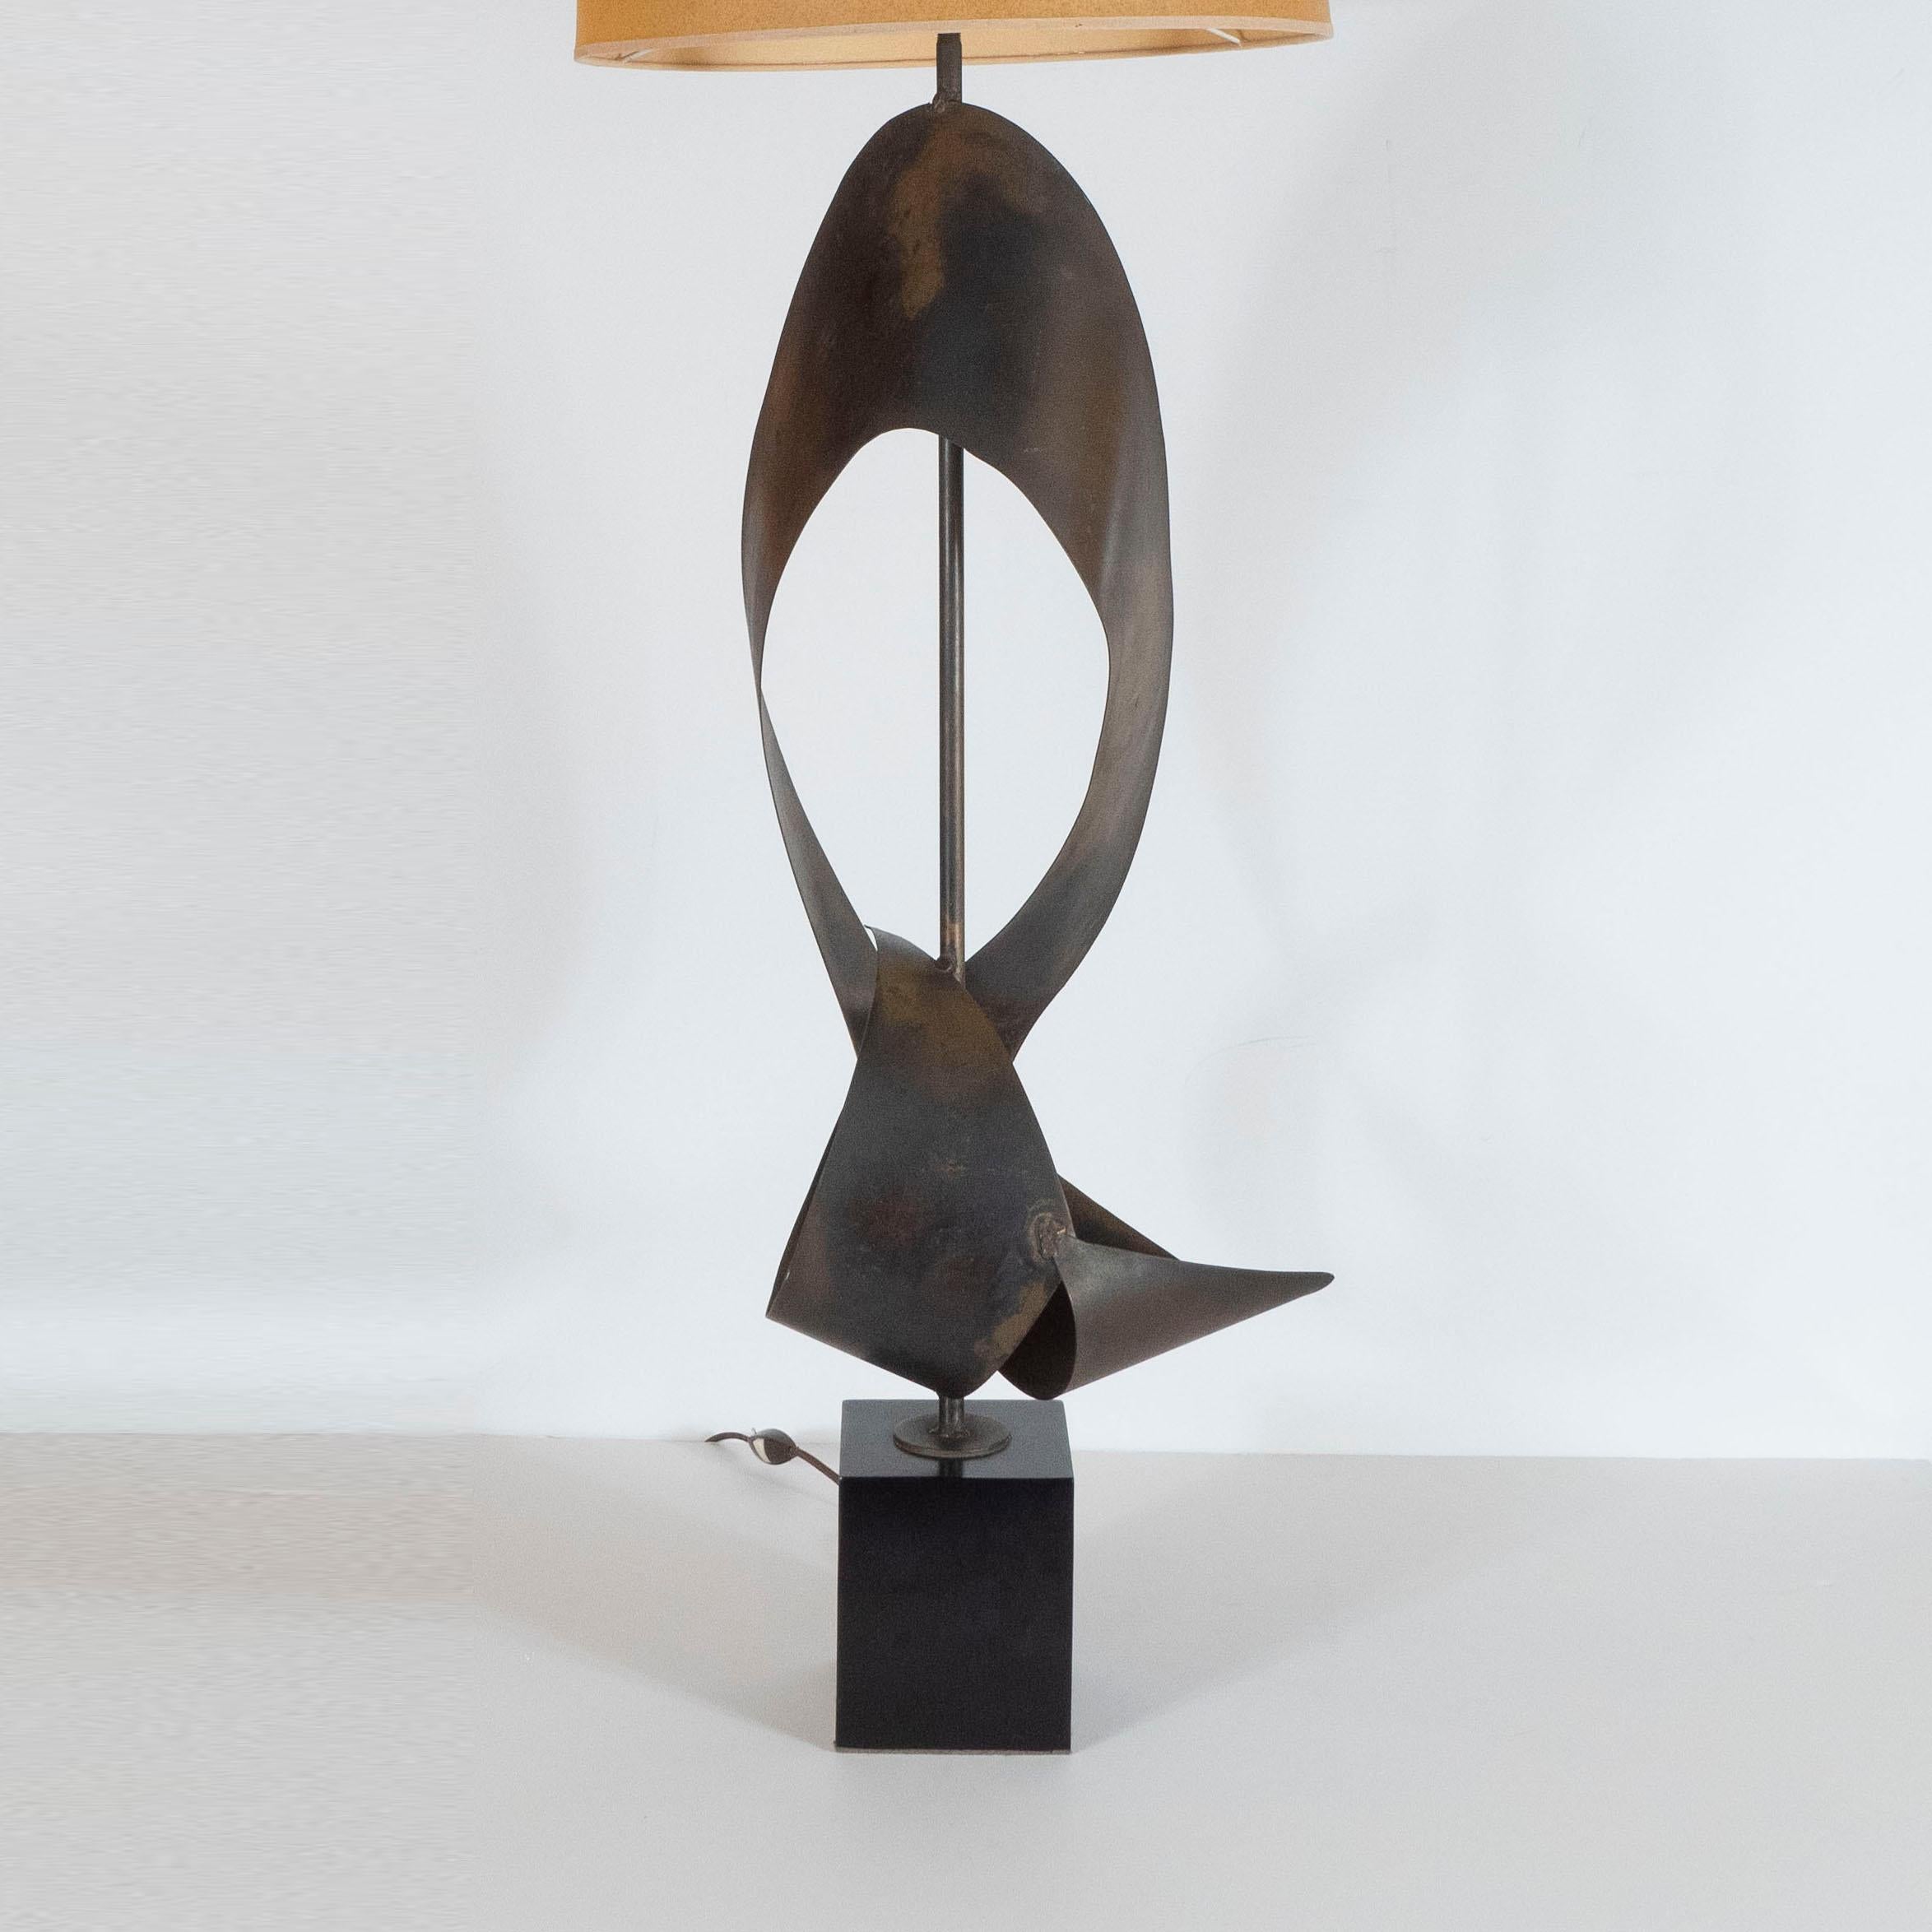 This dramatic and graphic pair of table lamps were realized in the United States, circa 1960. They feature contorting ribbons of patinated steel threaded with a cylindrical rod in the same material that attaches to a volumetric square black enamel